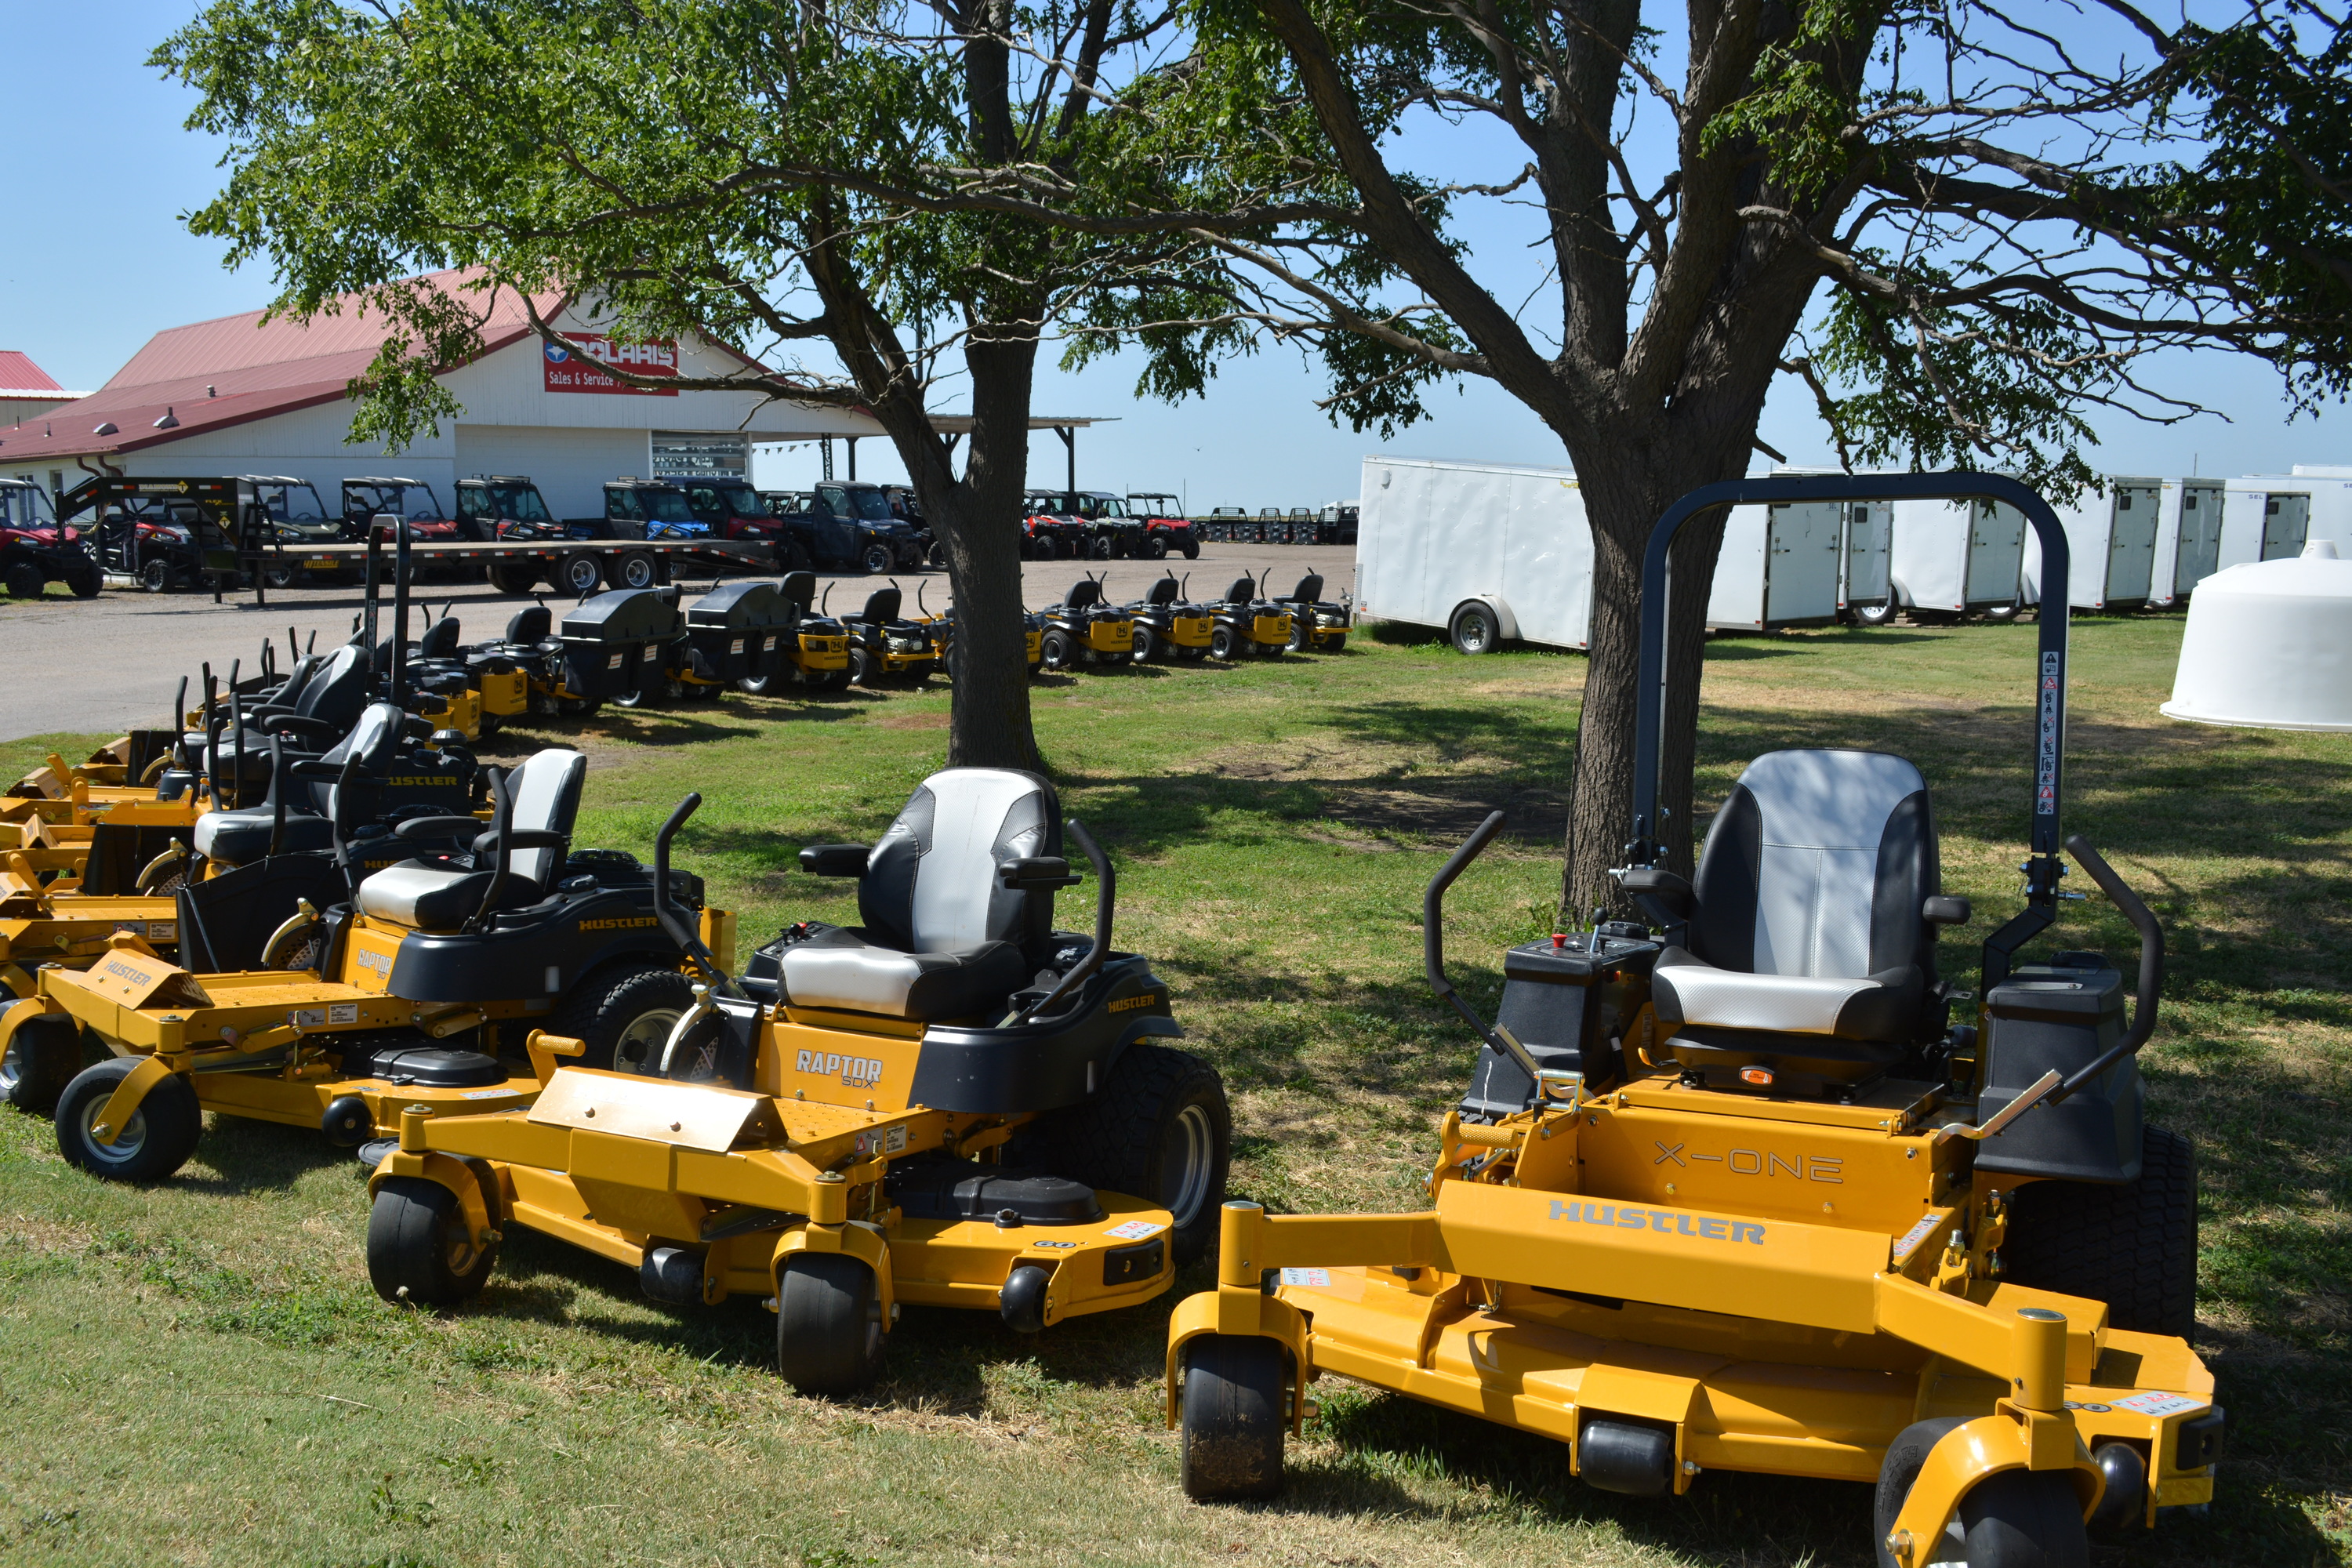 A lot of Hustler Lawn Mowers all parked right next to each other.